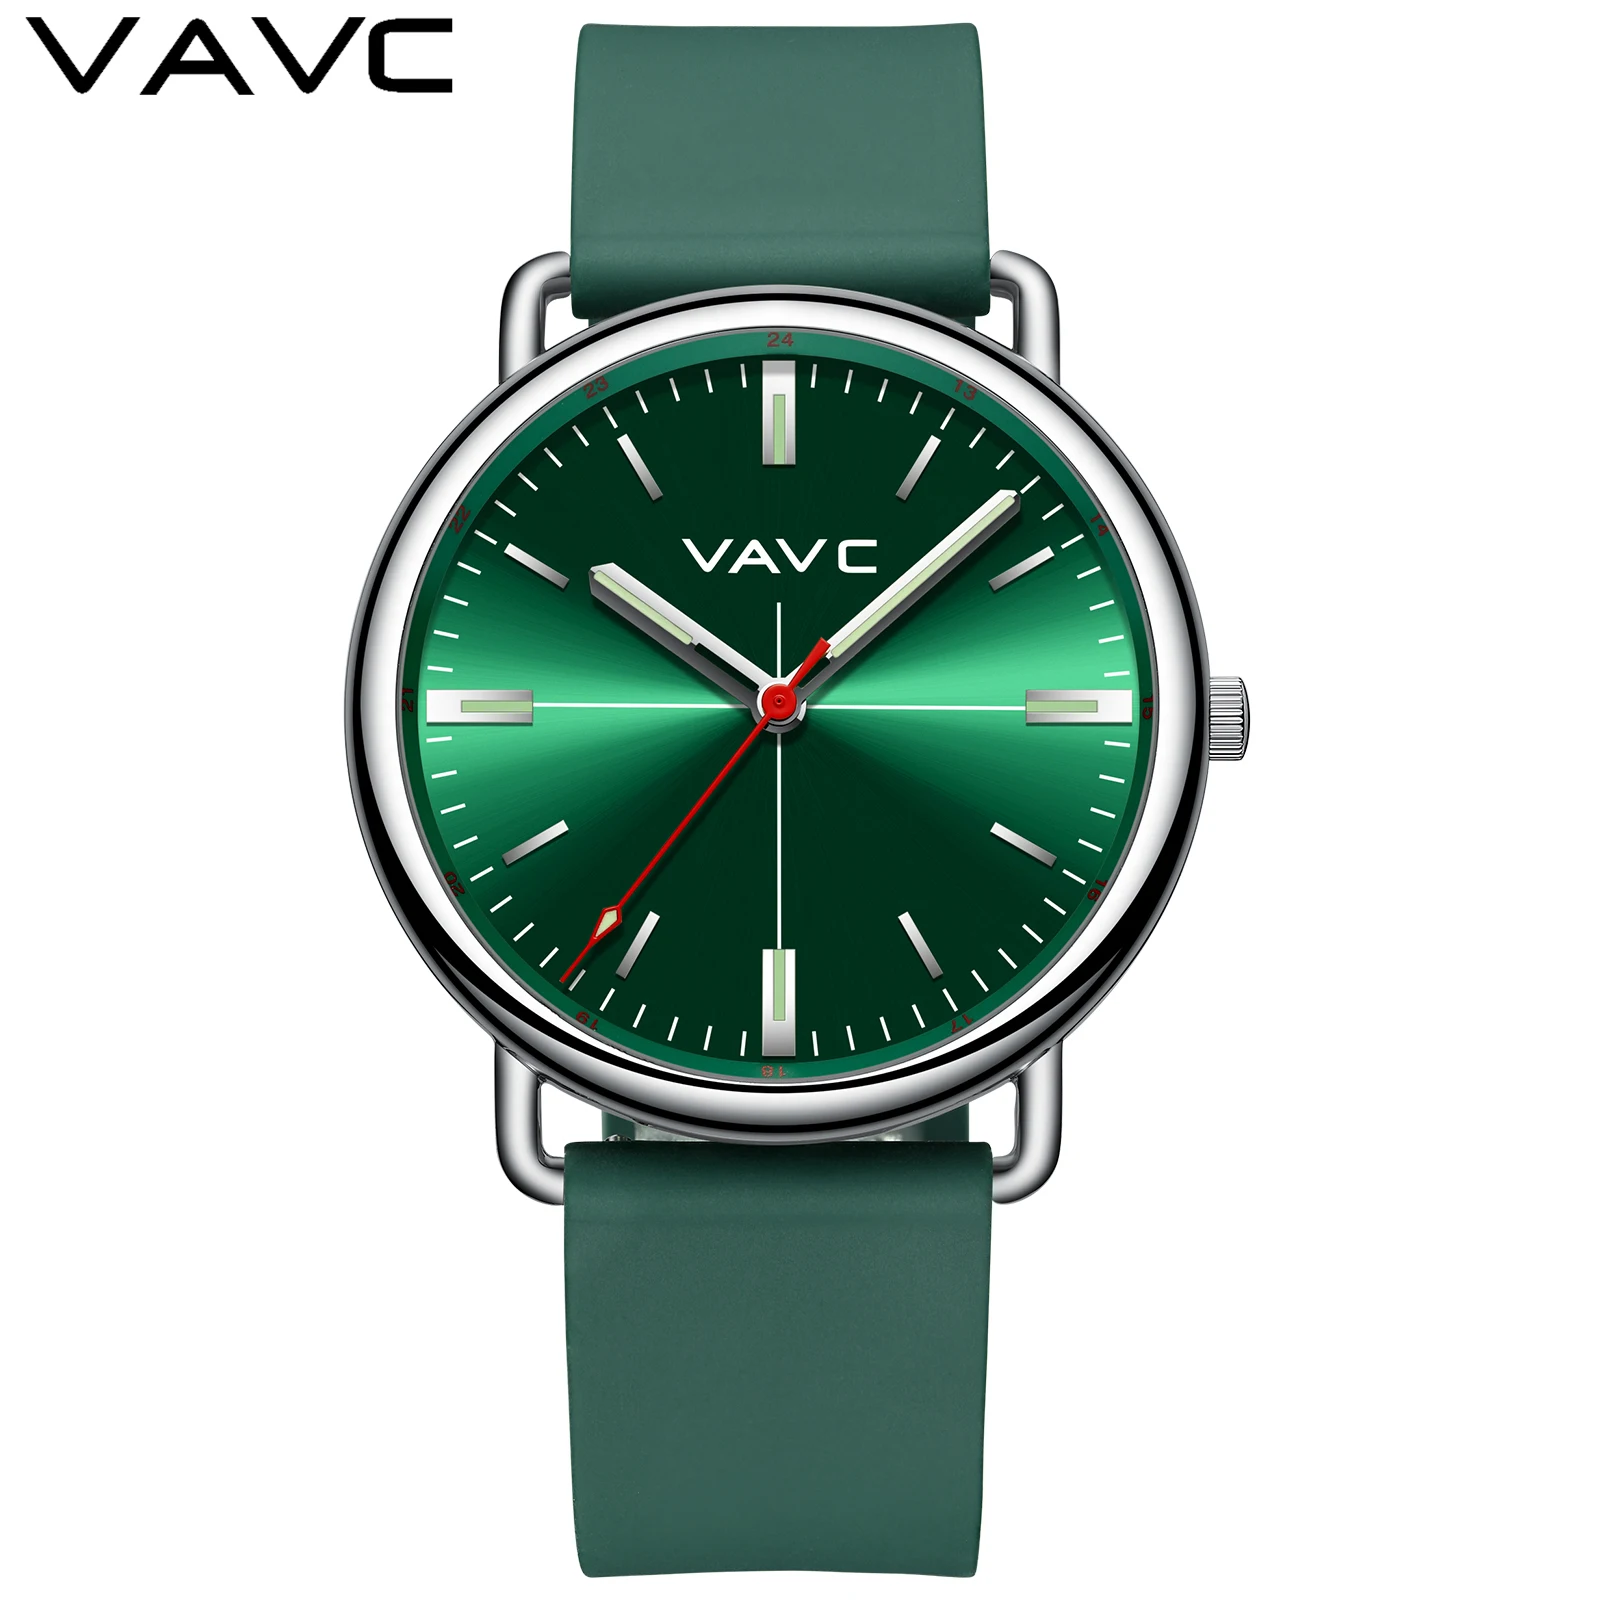 VAVC Nurse Watch with Second Hand and 24 Hour. Easy To Read for Women Military Time Easy To Read Big Dial 41MM Rose-Gold Plated